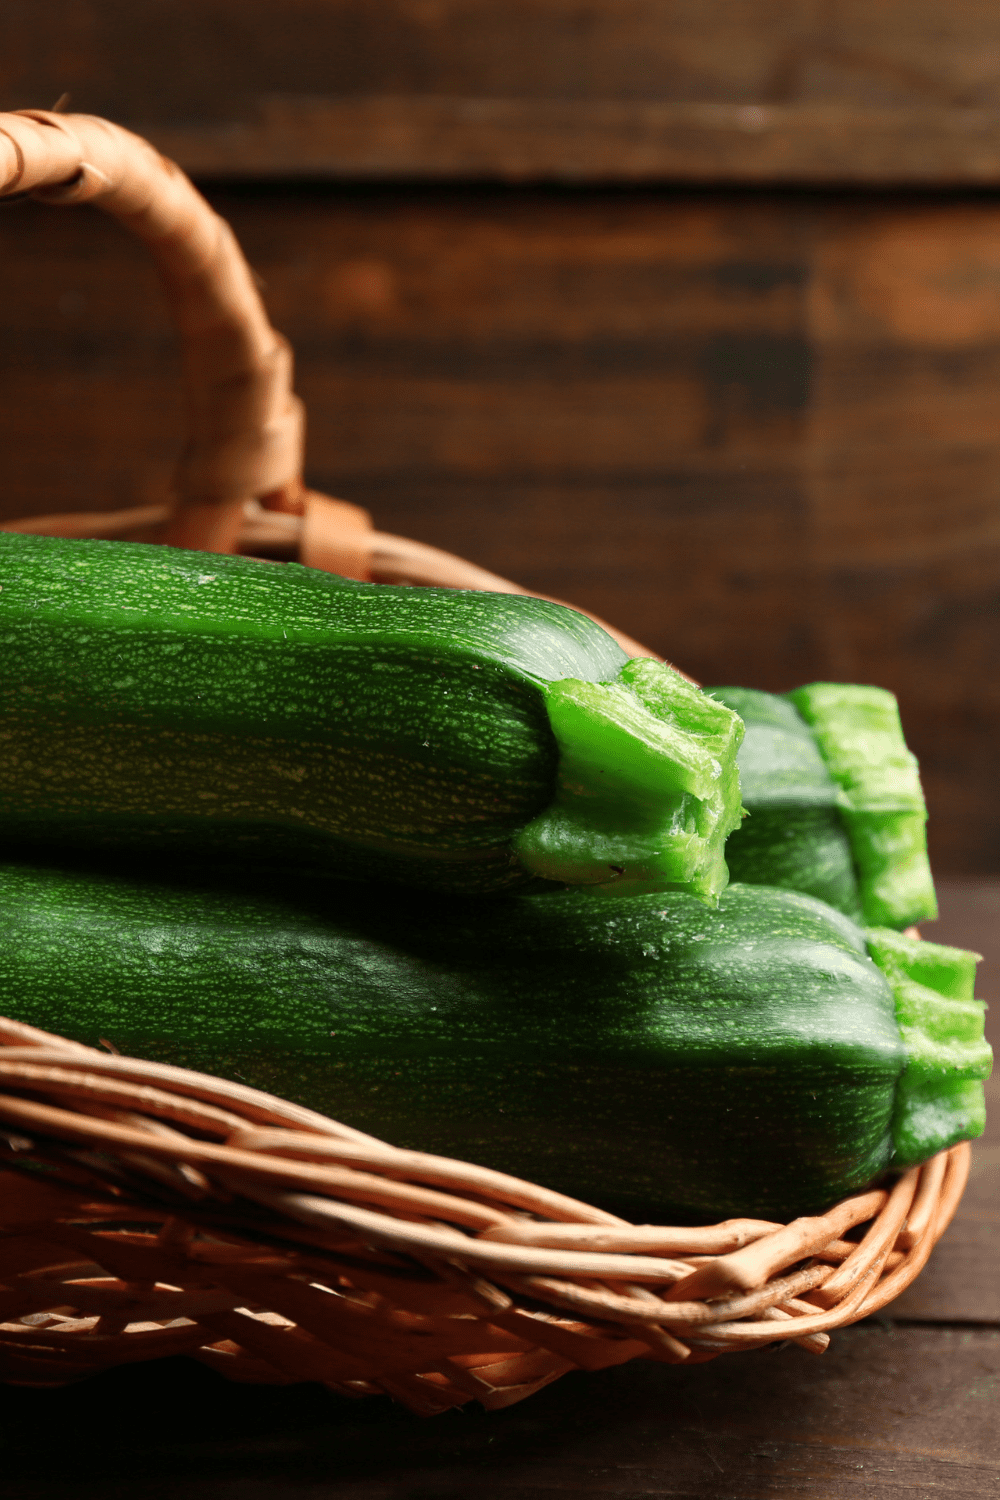 zucchini in wicker basket with wood in background